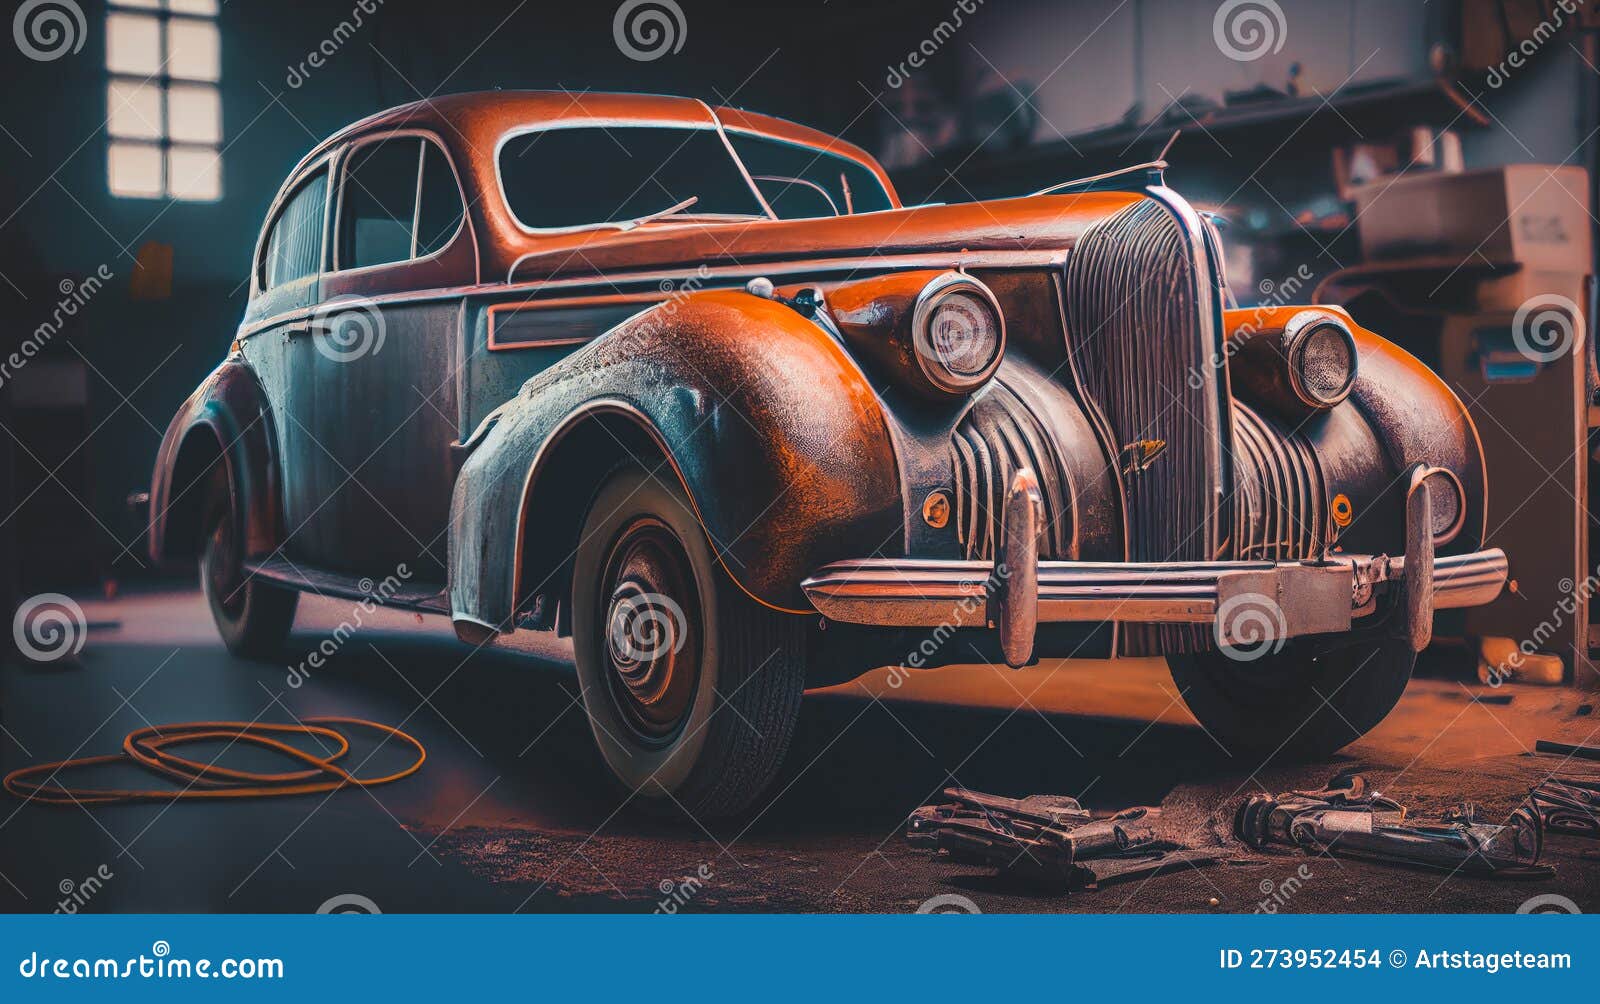 2,108 Oldtimer Car Garage Images, Stock Photos, 3D objects